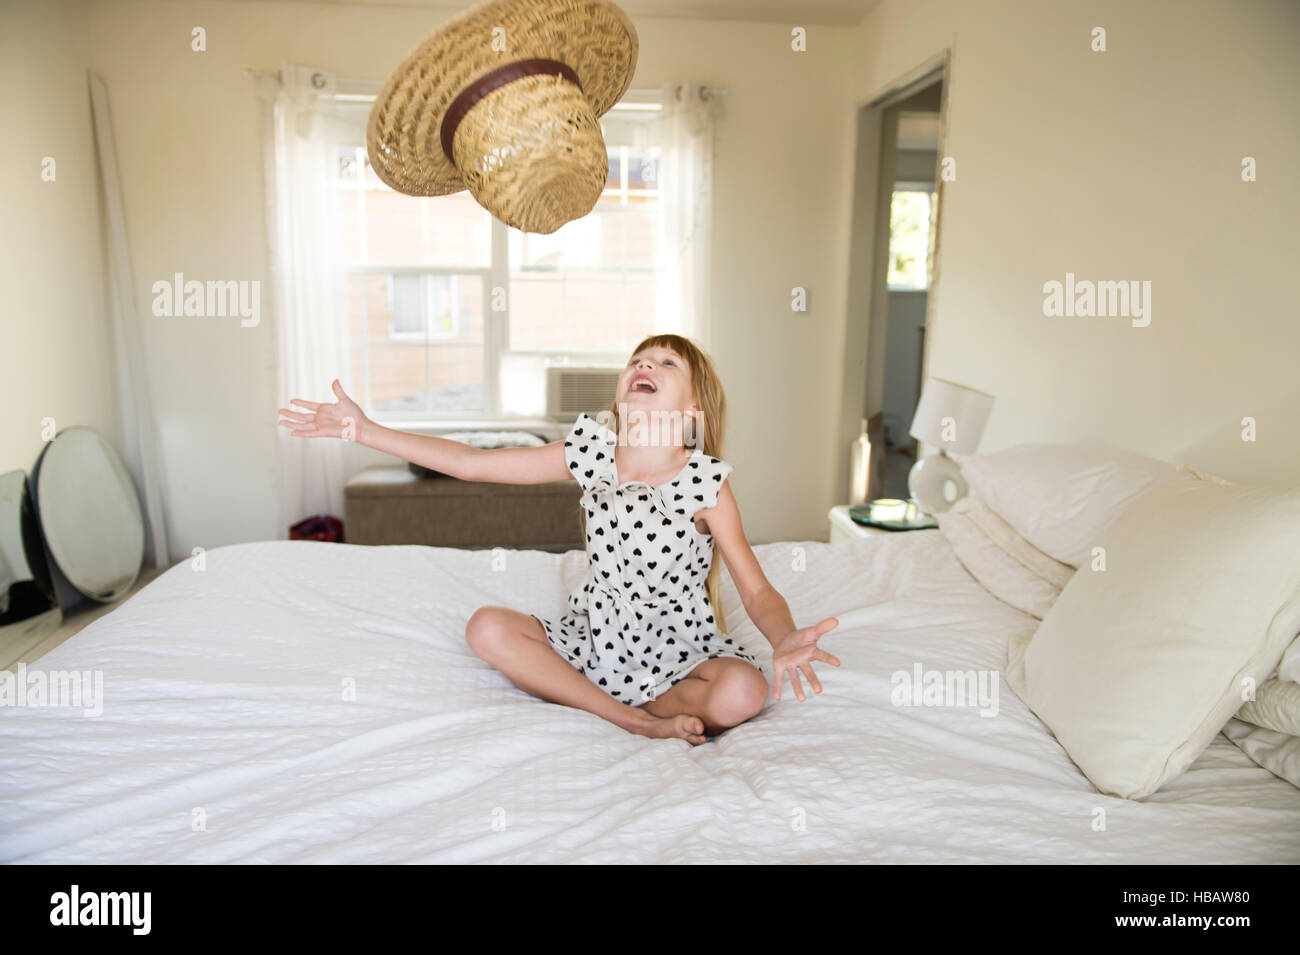 Young girl sitting on bed, throwing straw hat up in air Stock Photo